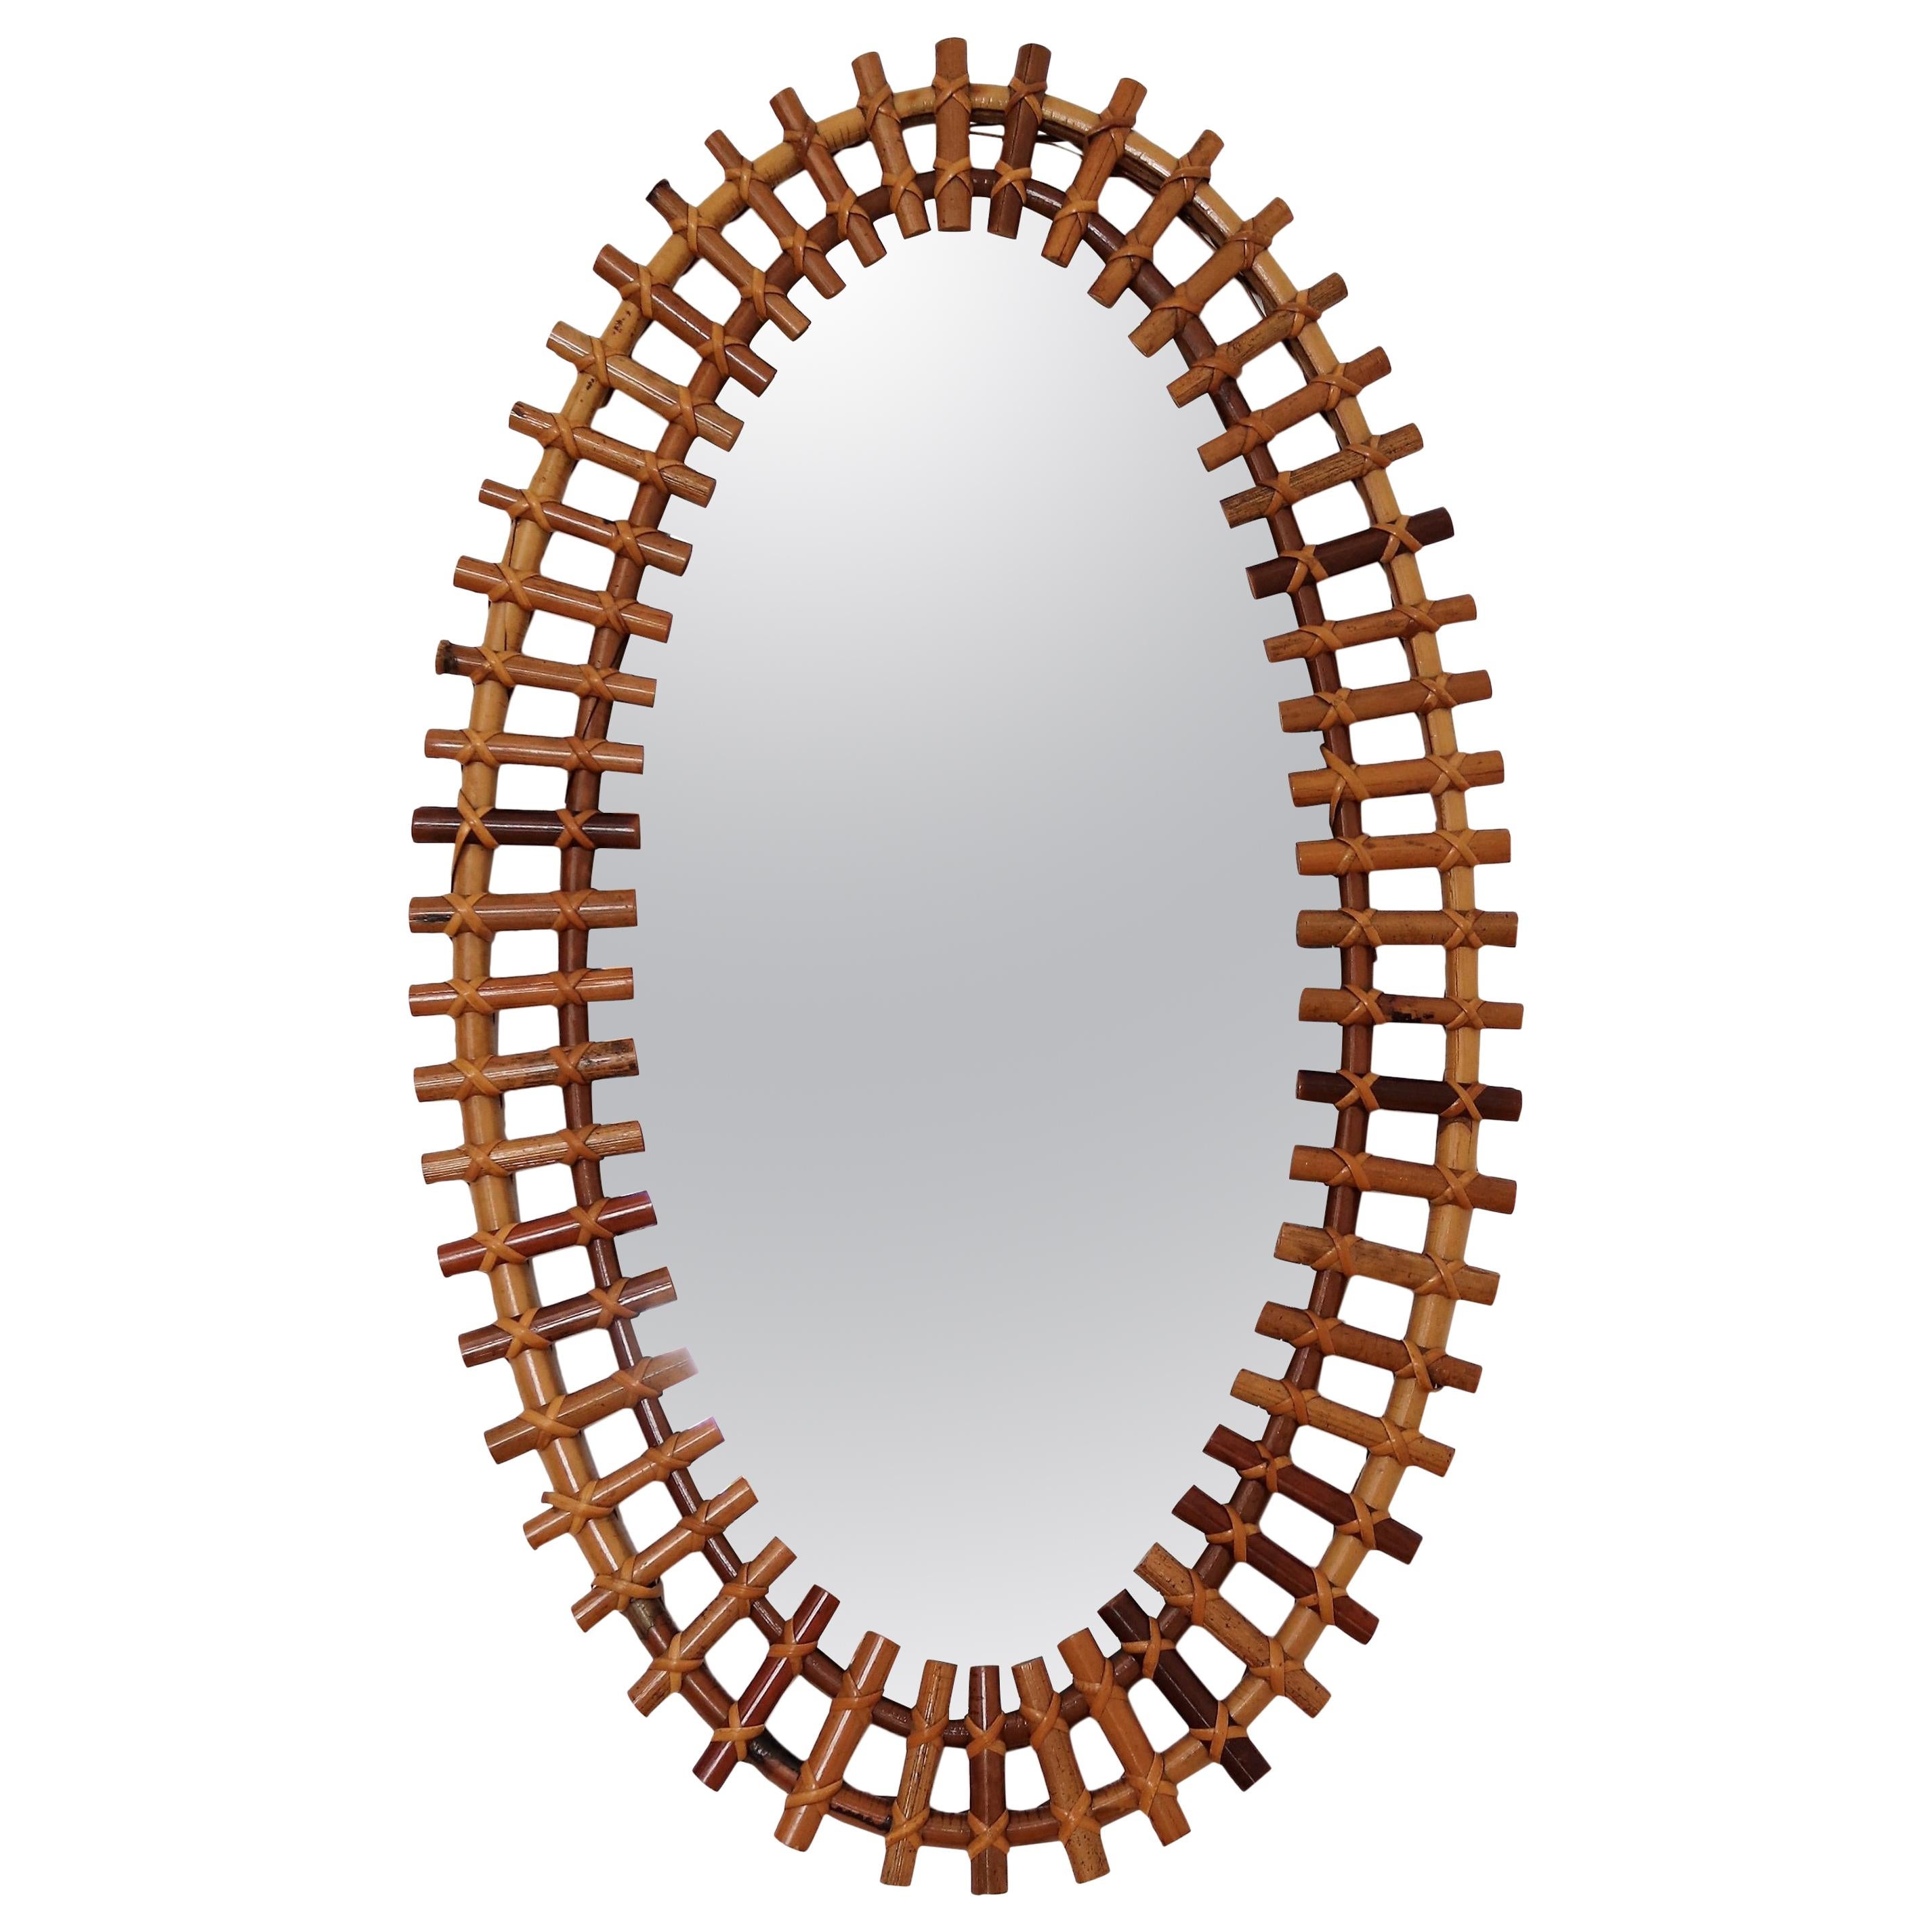 Italian Midcentury Oval Wall Mirror With Bamboo Frame, 1960s